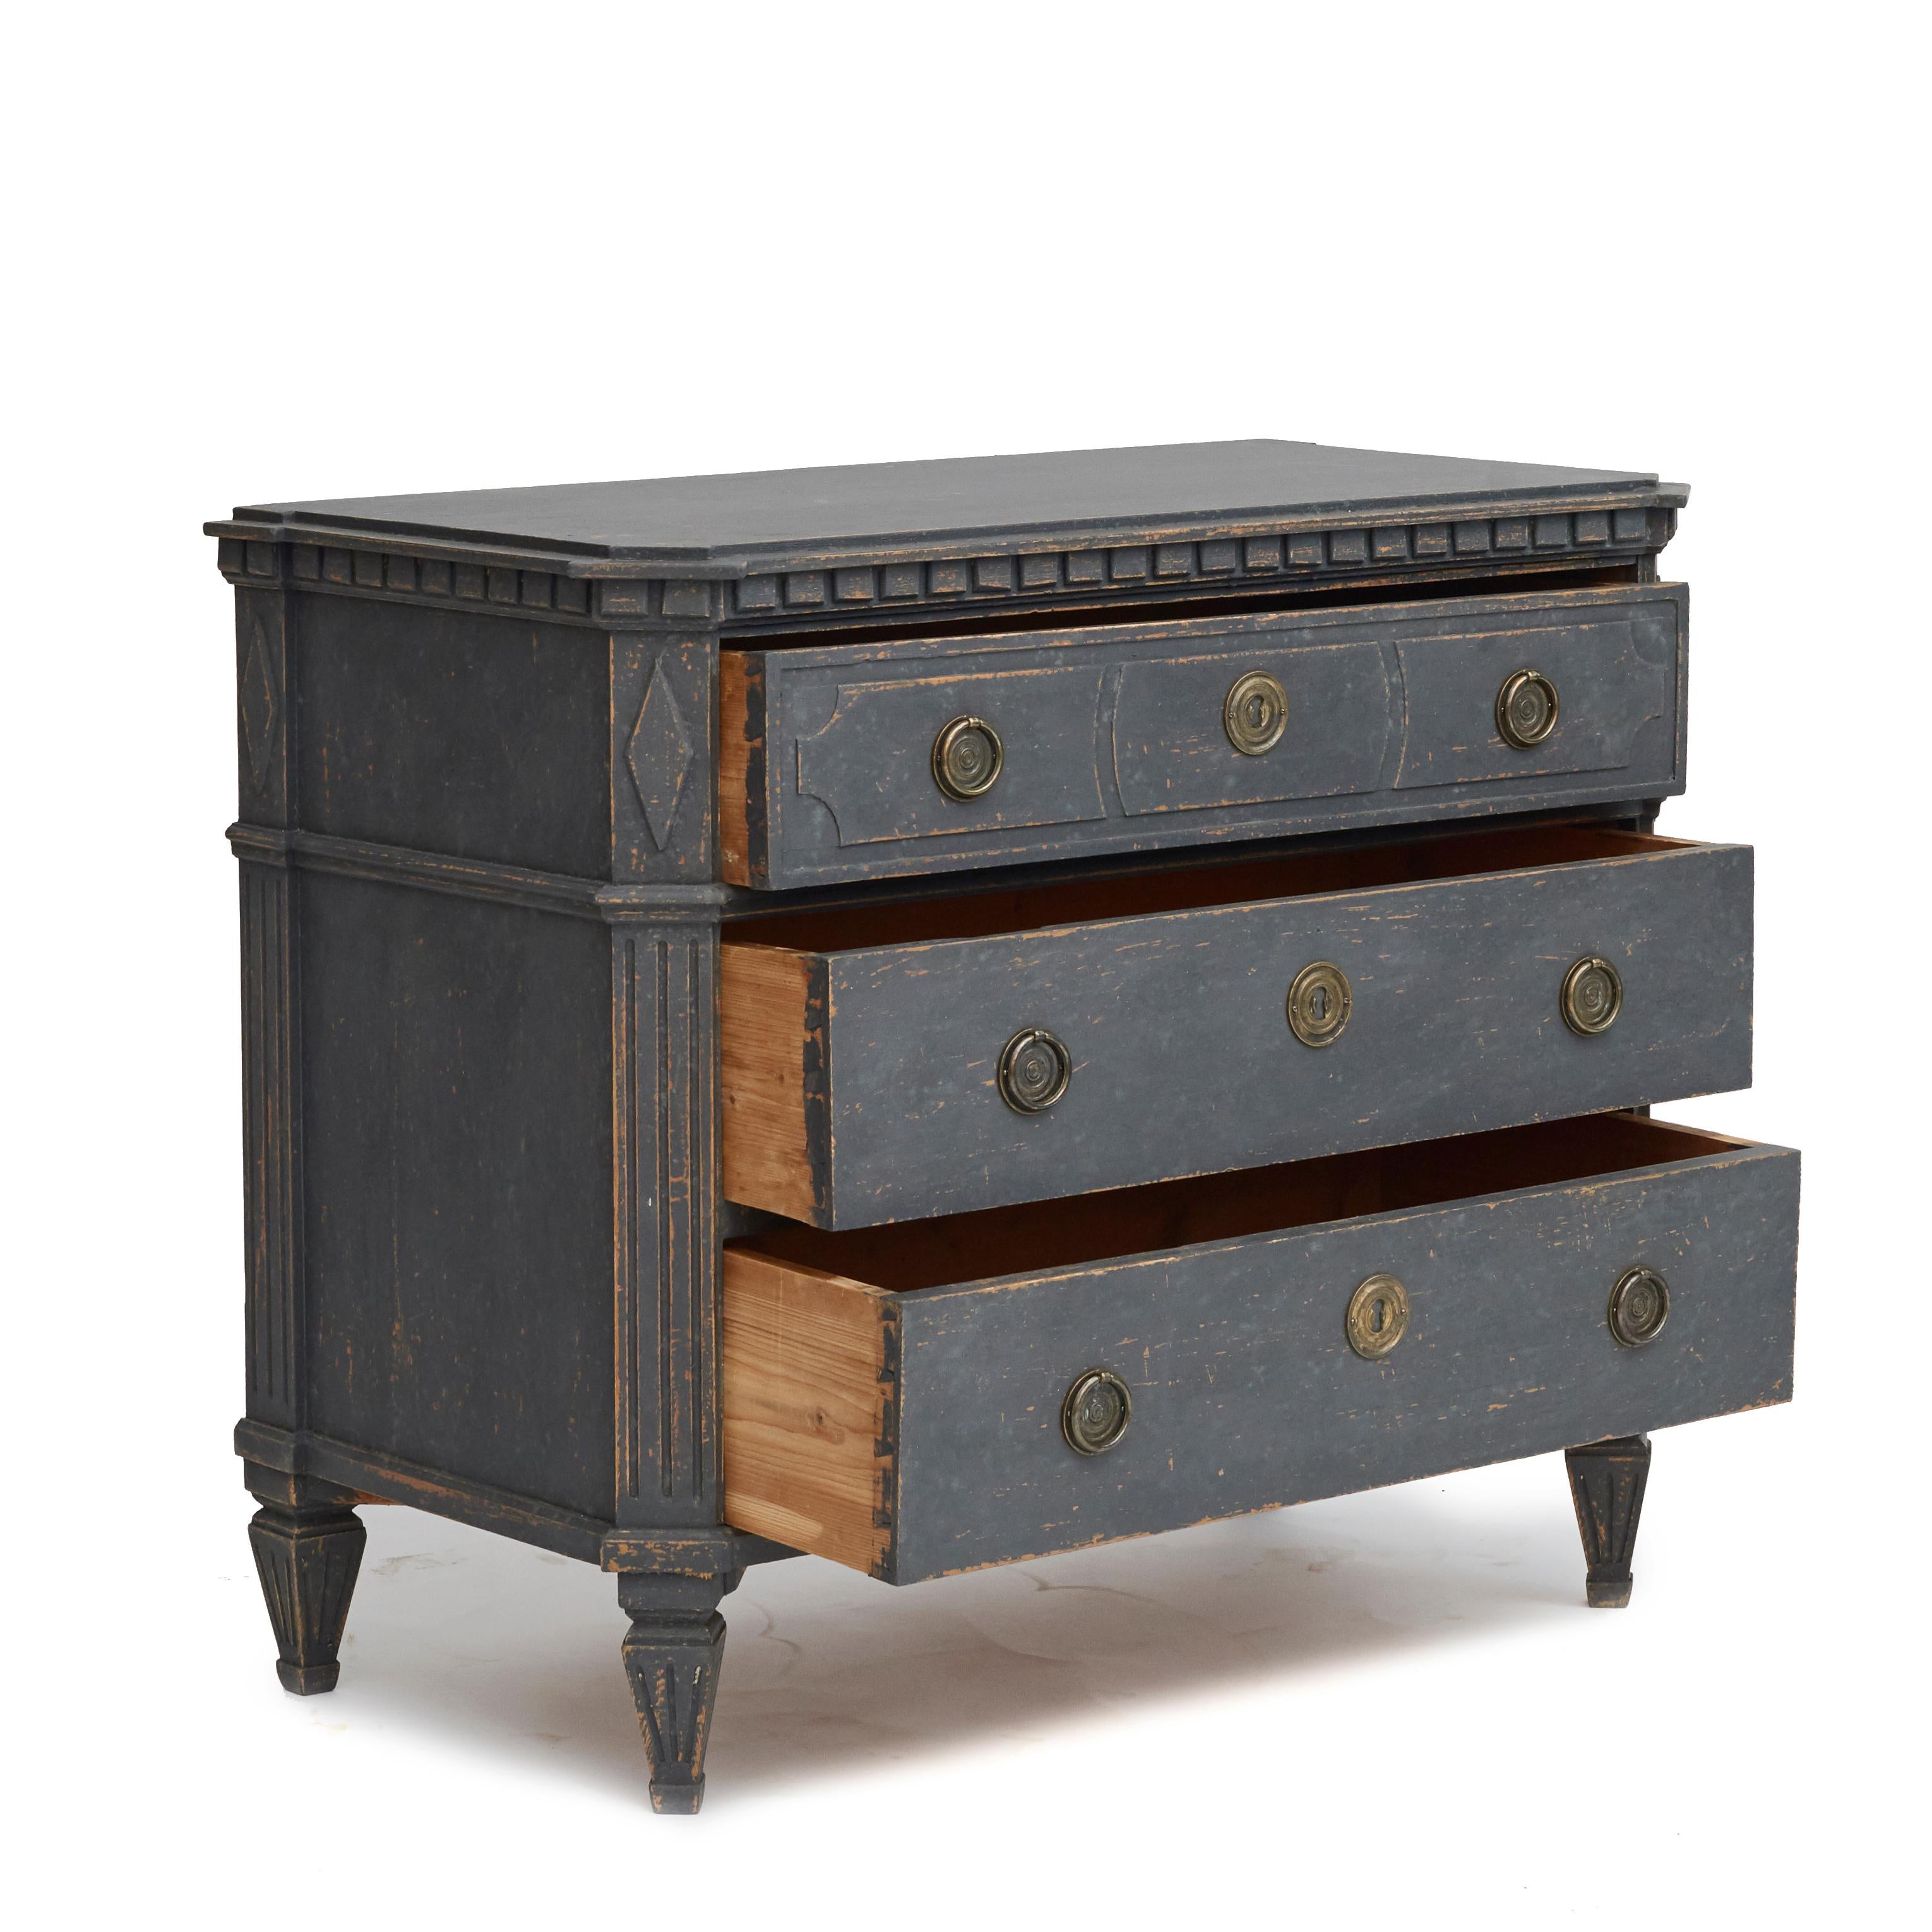 A pair of Swedish Gustavian style graphite grey painted three-drawer commodes dating from the 19th century.
Each chest features a rectangular top with canted corners in the front, sitting above a delicate dentil molding running on three